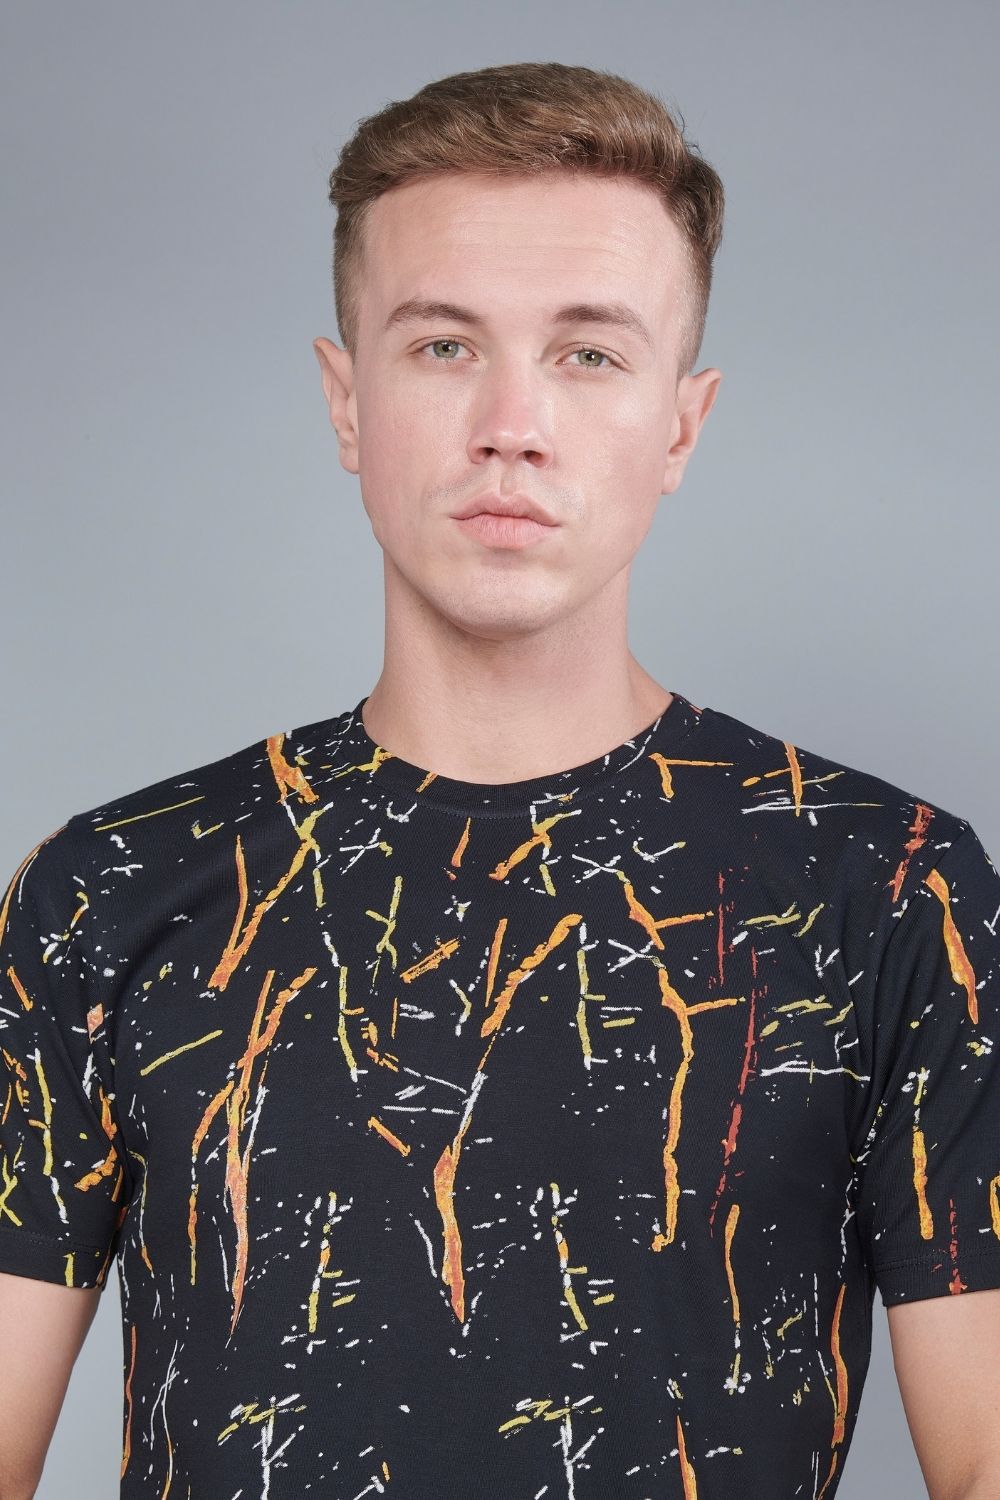 Black color, sprinkle patterned all over print T shirt for men with half sleeves and round neck, close up.